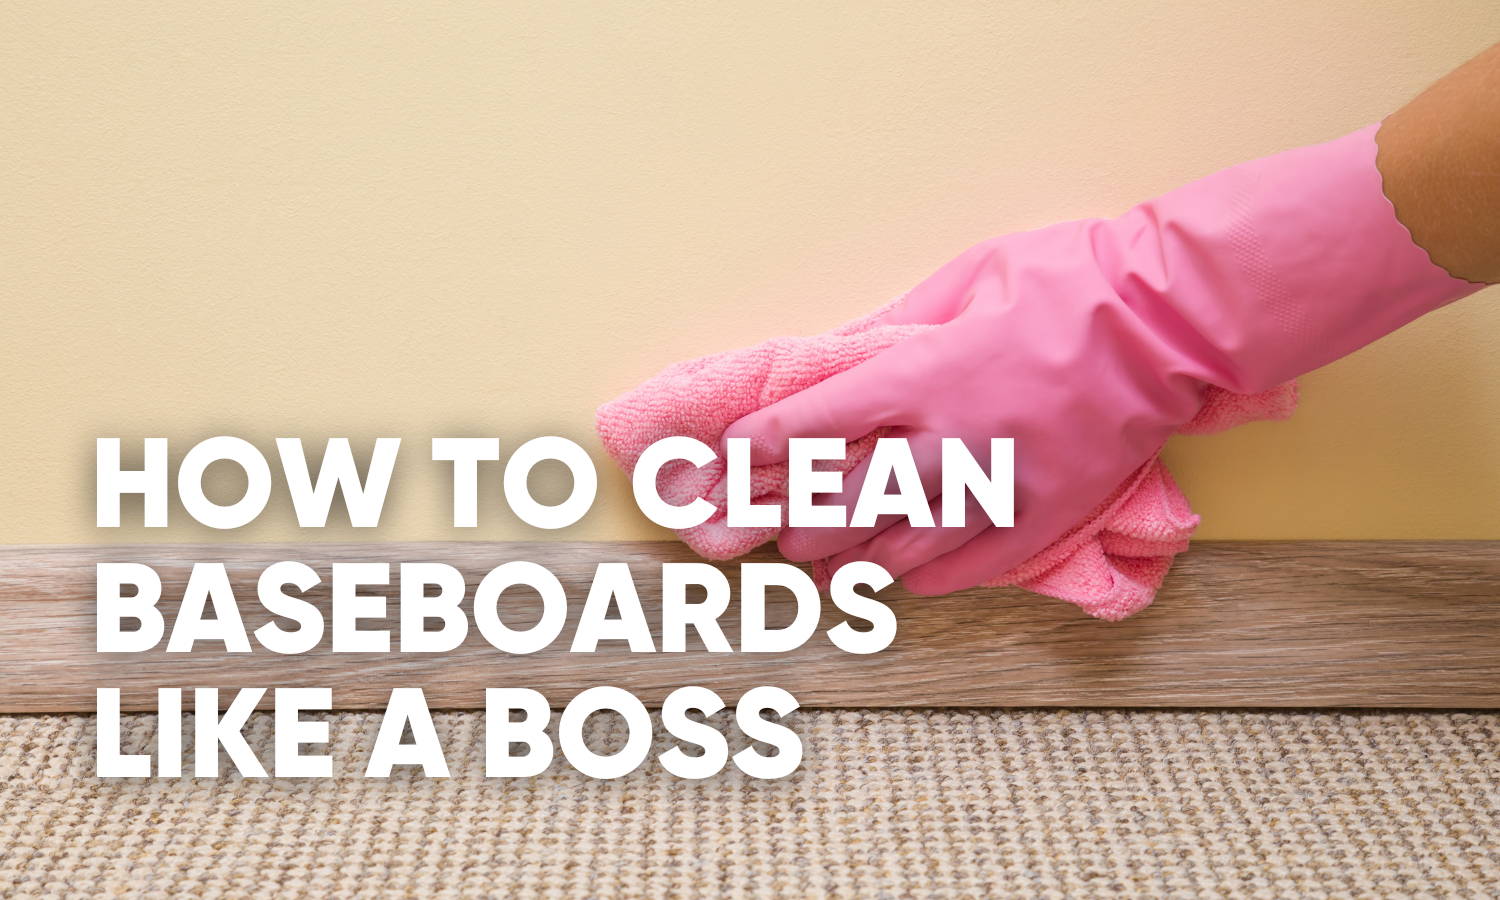 How to Clean Baseboards Like a Boss